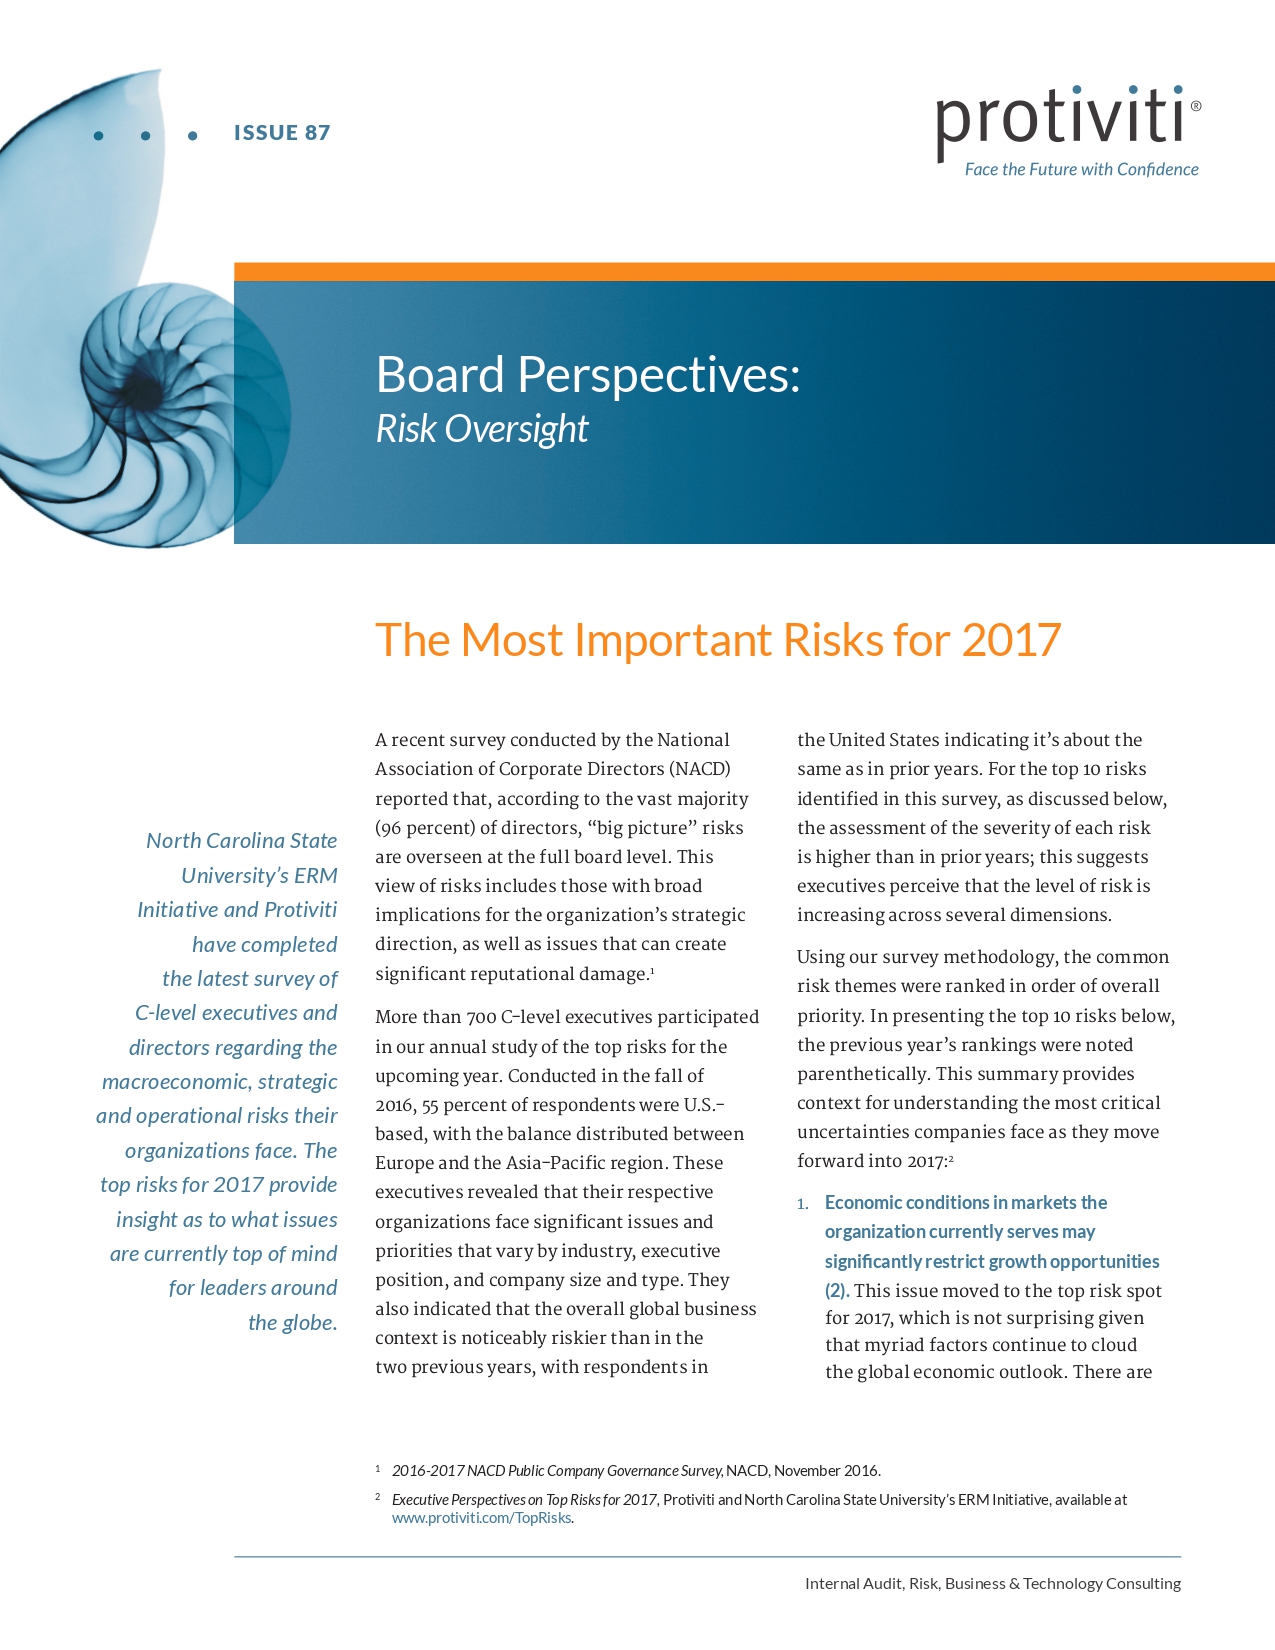 Screenshot of the first page of The Most Important Risks for 2017